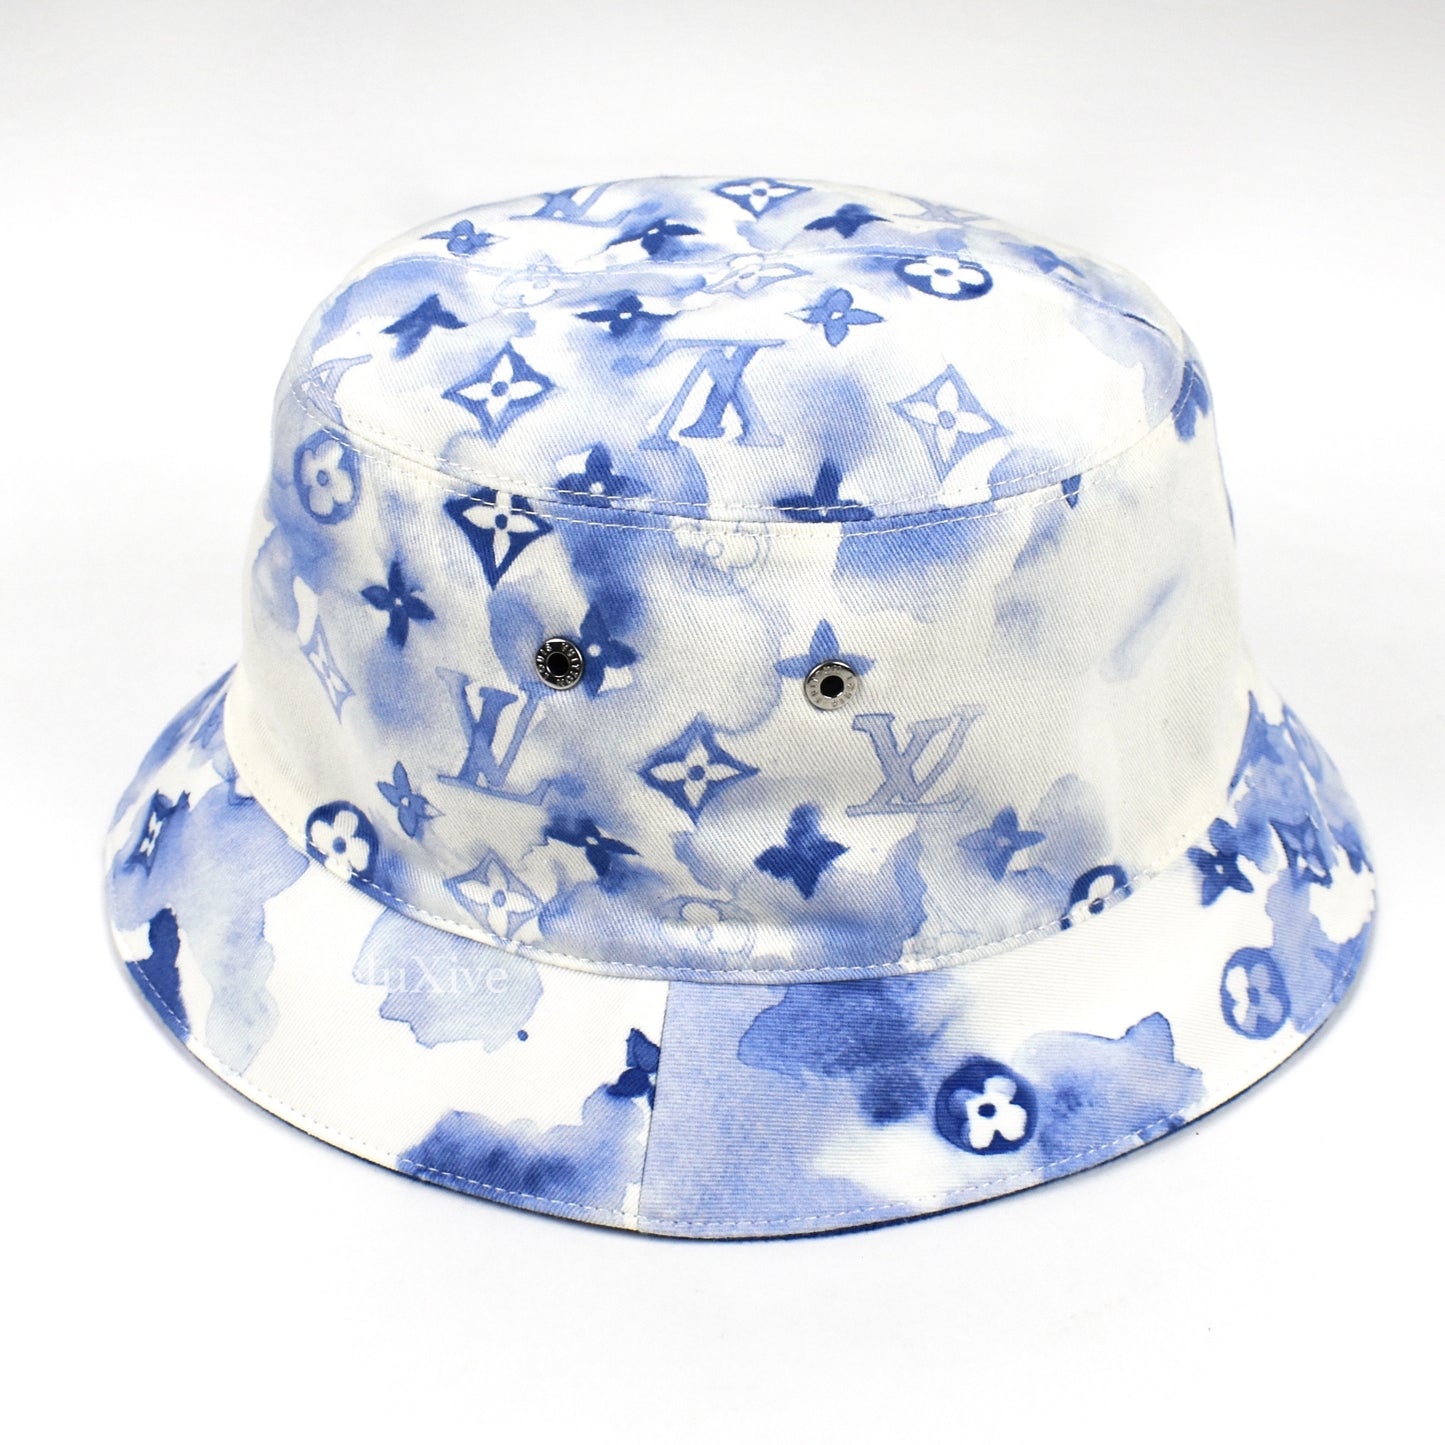 Thebagriculture.com - Stay shady this summer with the Louis Vuitton  Graphical Reversible Bucket Hat #louisvuitton #lv #luxury  #designer#monogram #summer #beach #hat #reversible #blue #stripes